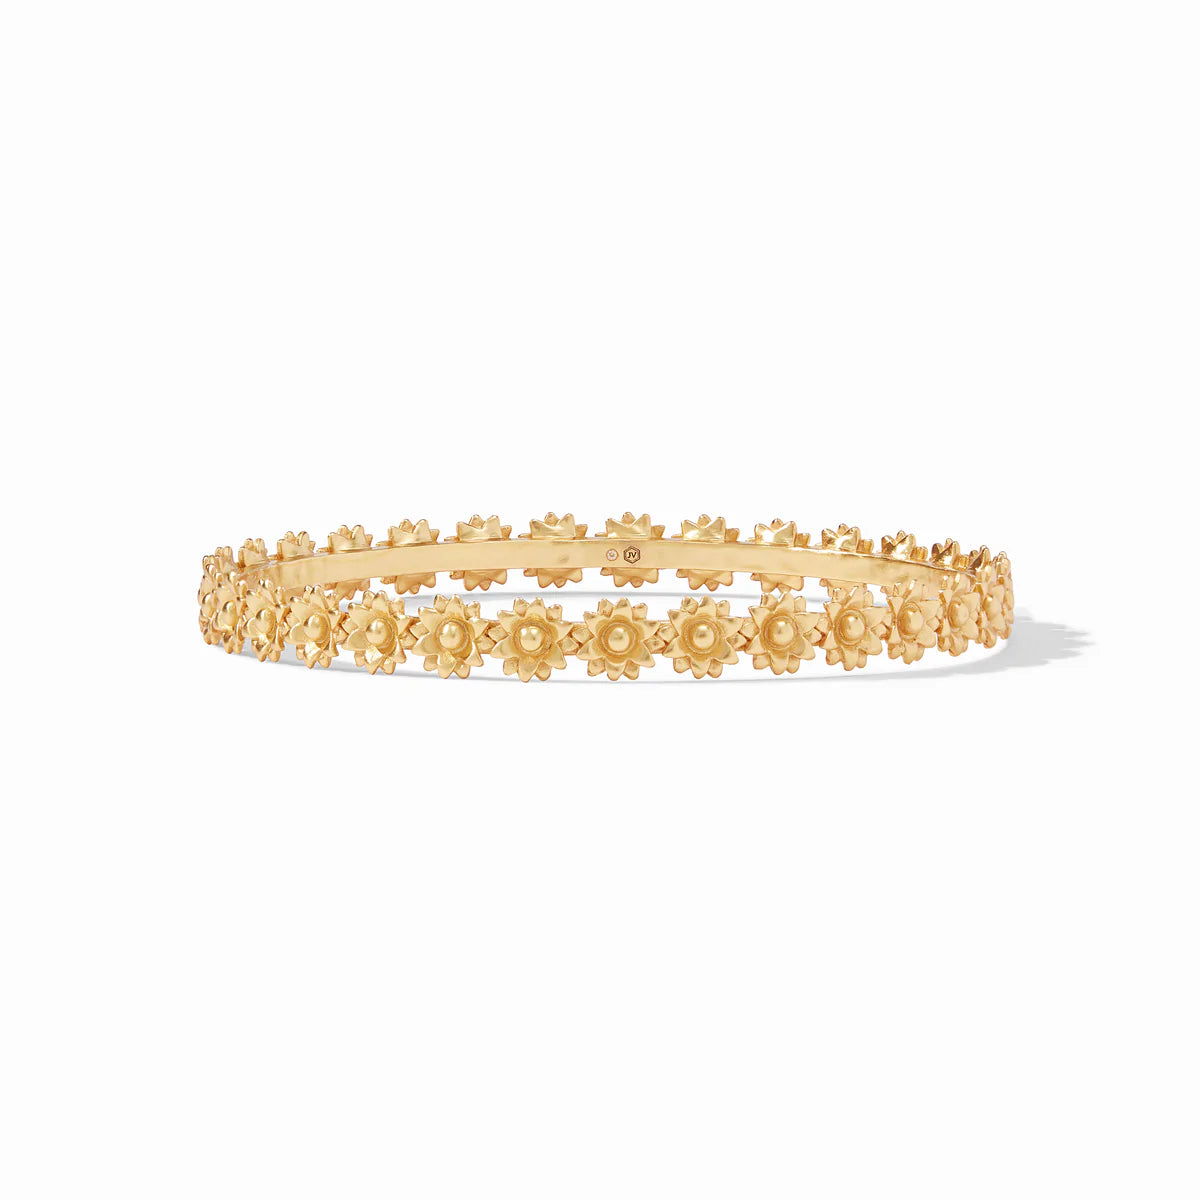 Flora Stacking Bangle by Julie Vos. Gold-plated daisy chain makes this bangle feel fresh, fun, and even better in multiples. Shop at The Painted Cottage in Edgewater, MD.